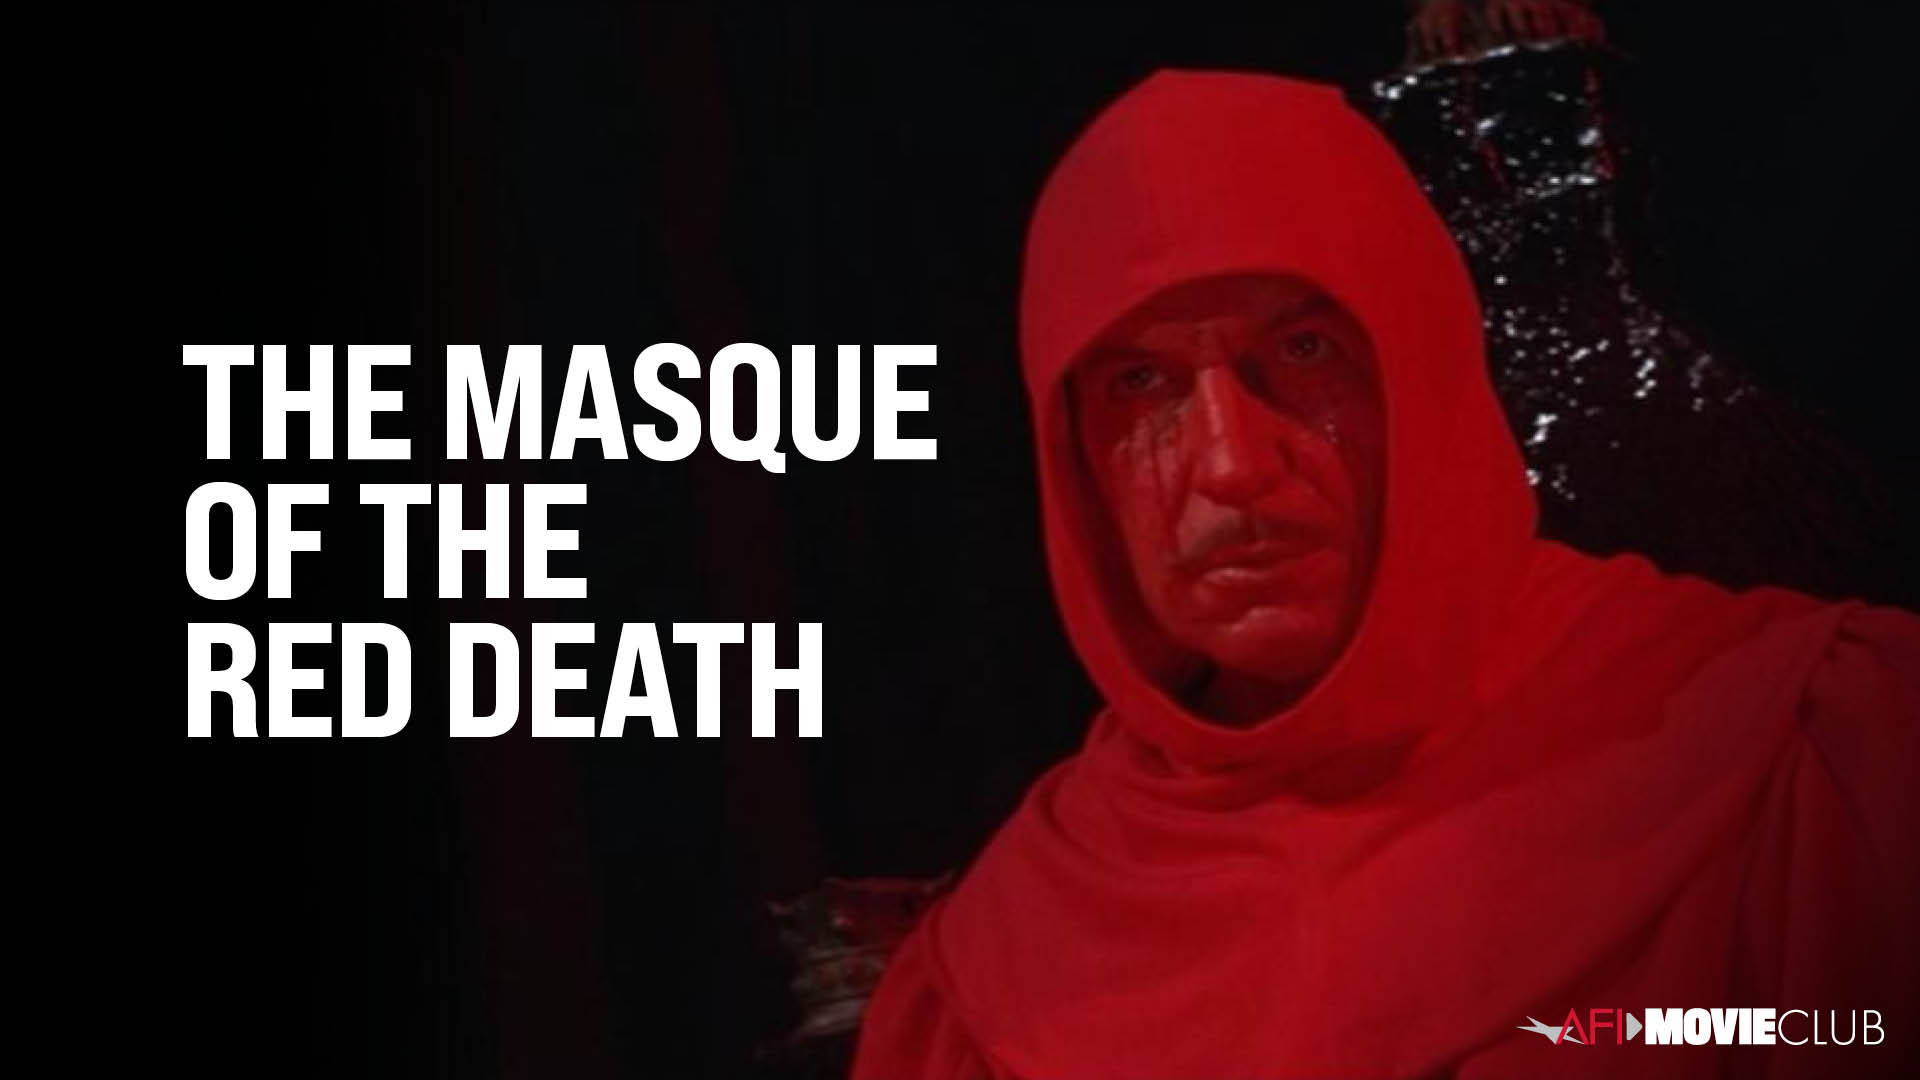 The Masque of the Red Death Film Still - Vincent Price